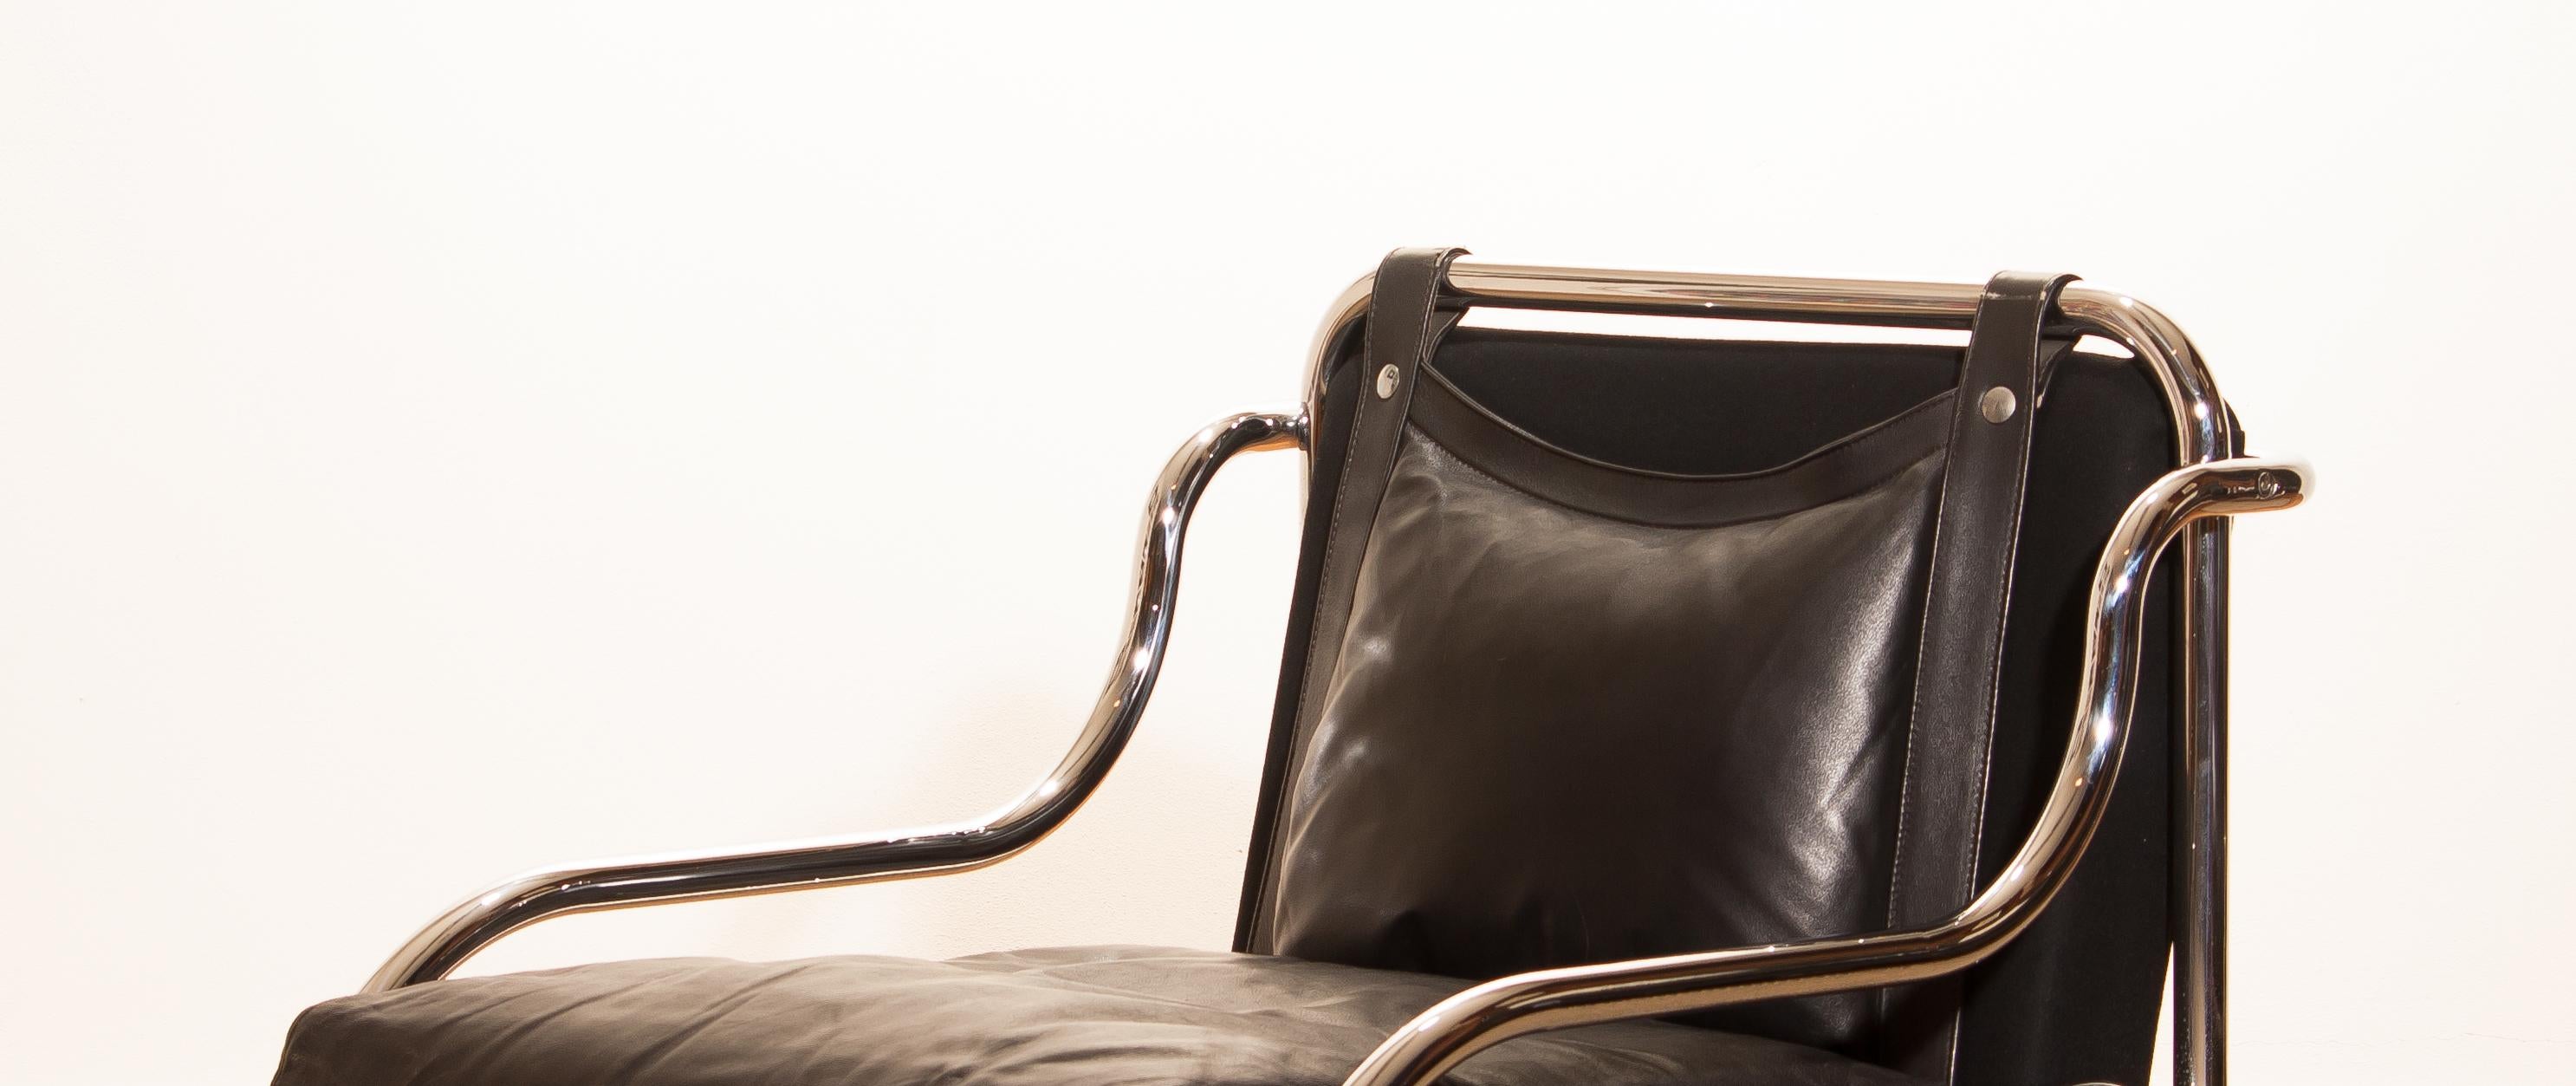 1960s, Leather and Chrome Lounge Chair by Gae Aulenti for Poltronova In Excellent Condition In Silvolde, Gelderland